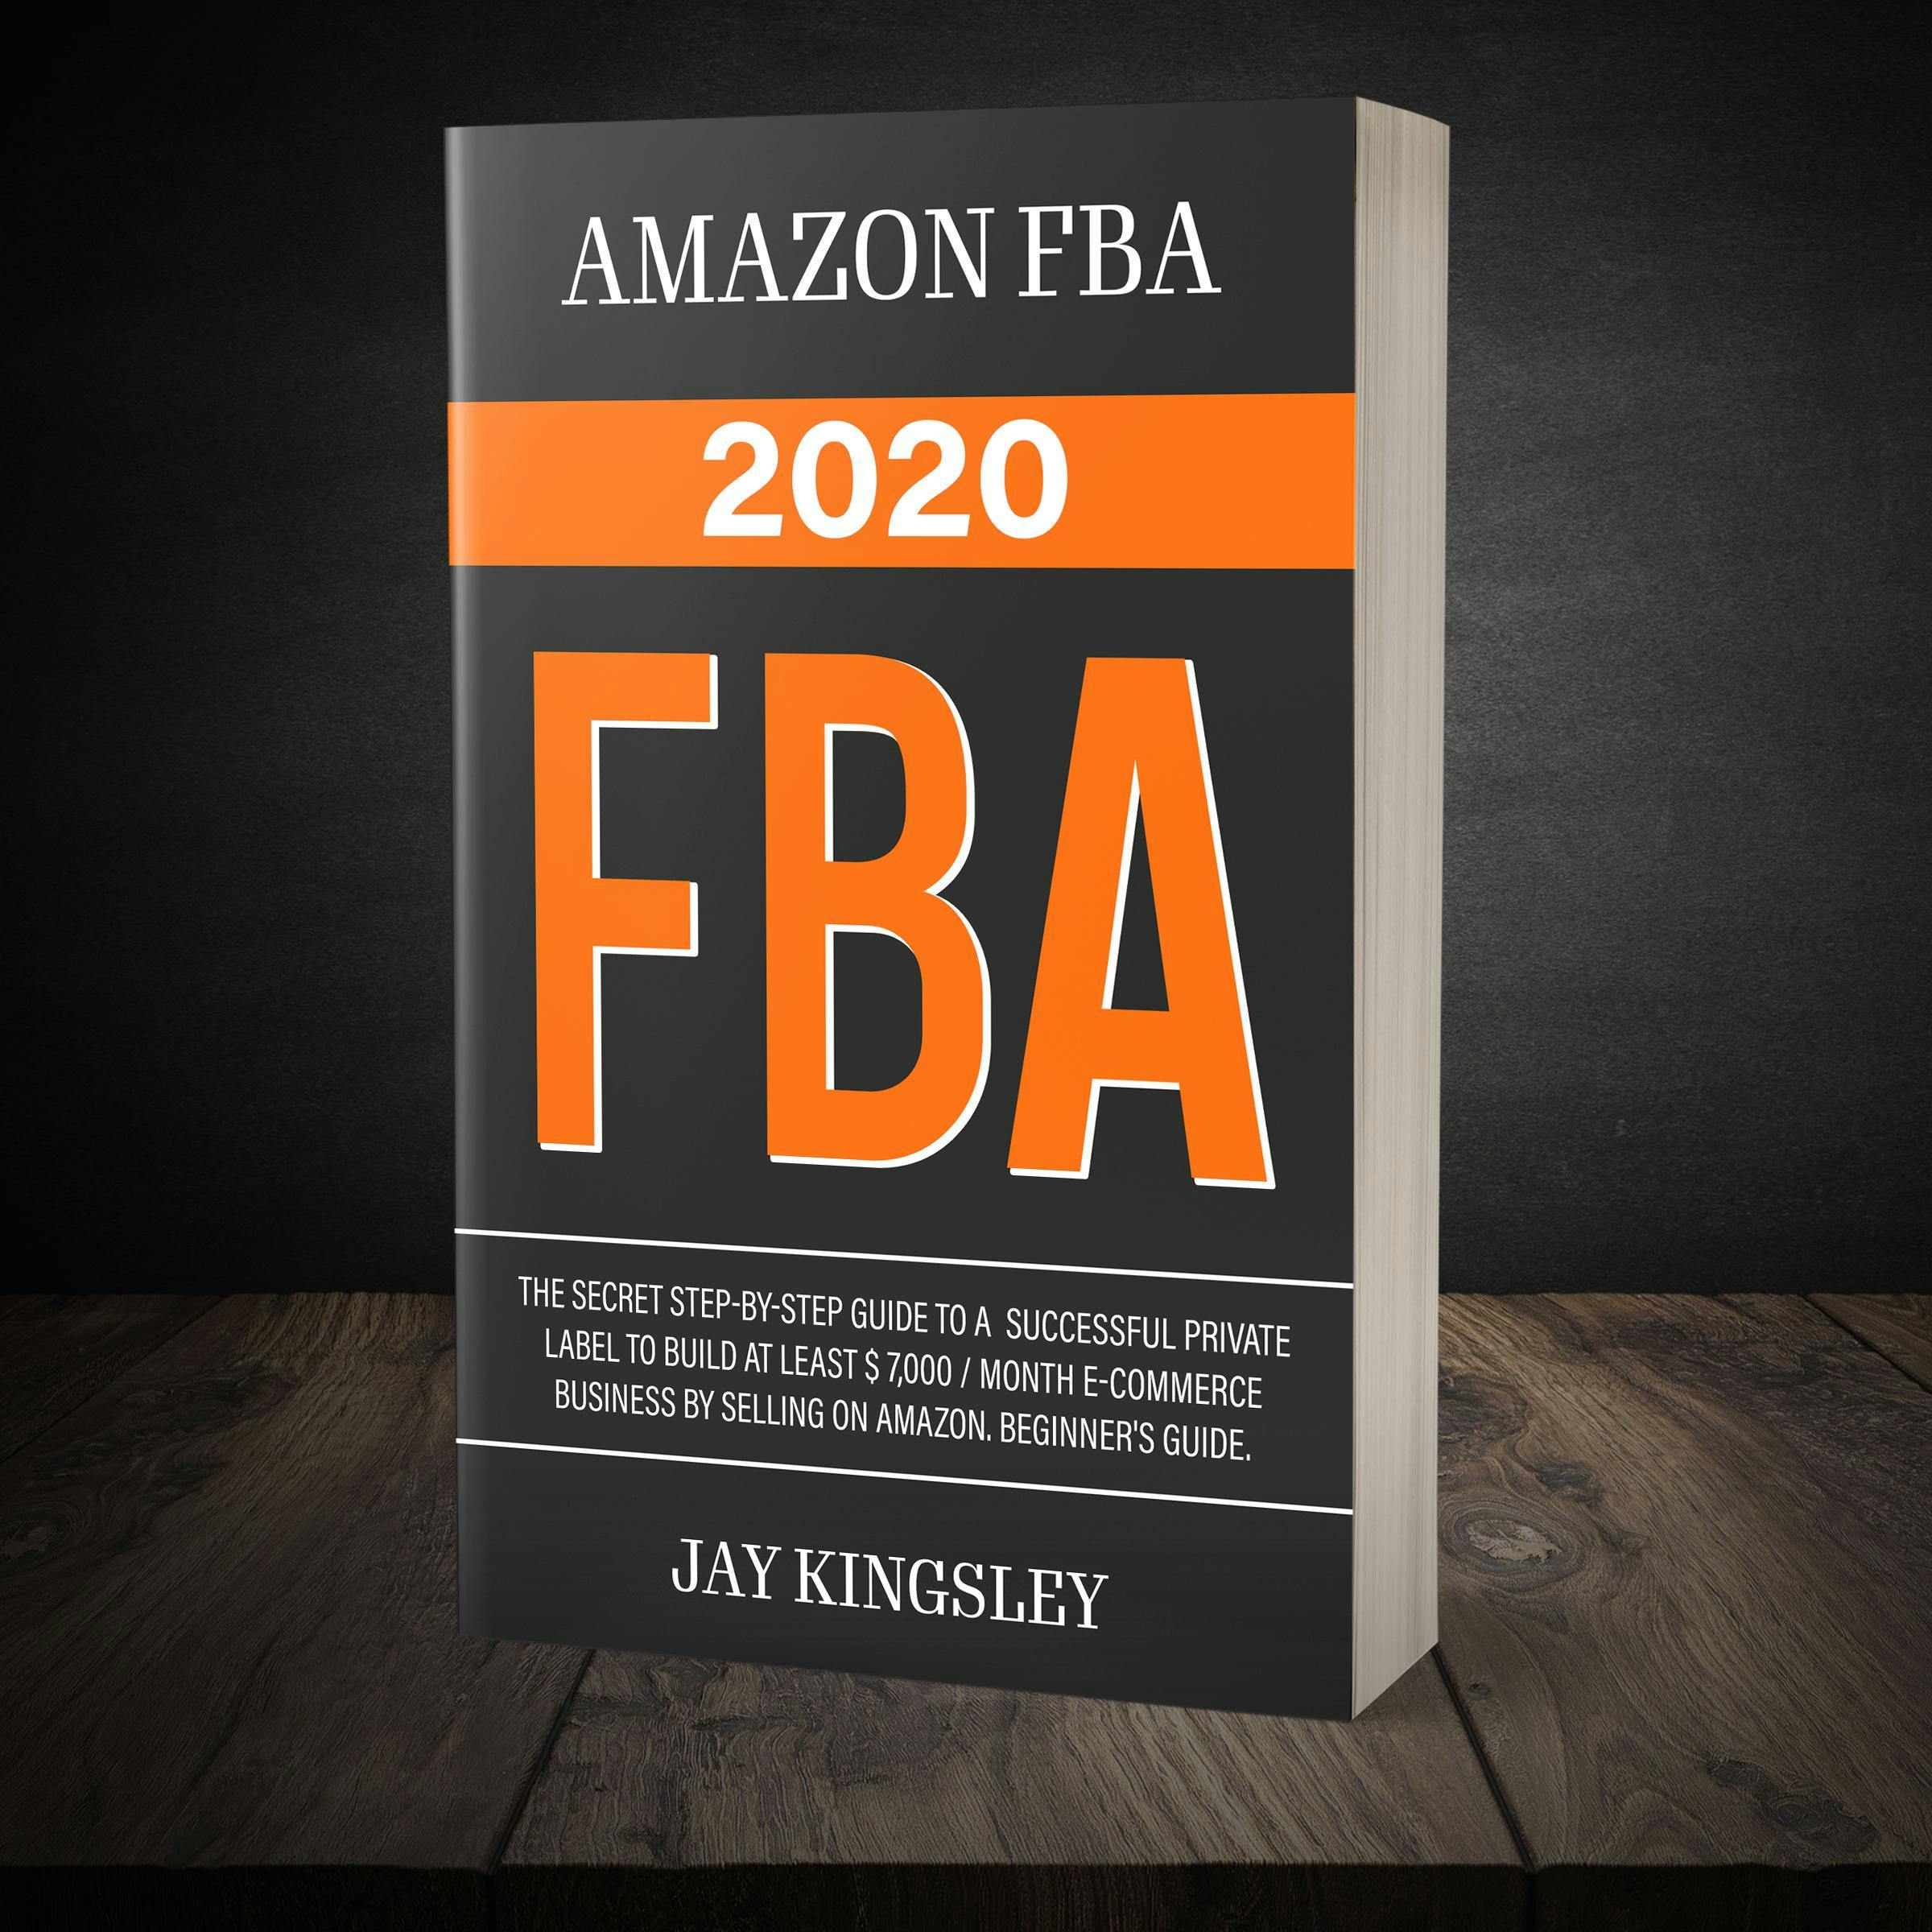 Amazon Fba - FBA 2020: The Secret Step-by-Step Guide to a Successful Private Label to Build at least $ 7,000 / Month E-Commerce Business by Selling on Amazon. Beginner's guide. - Jay Kingsley